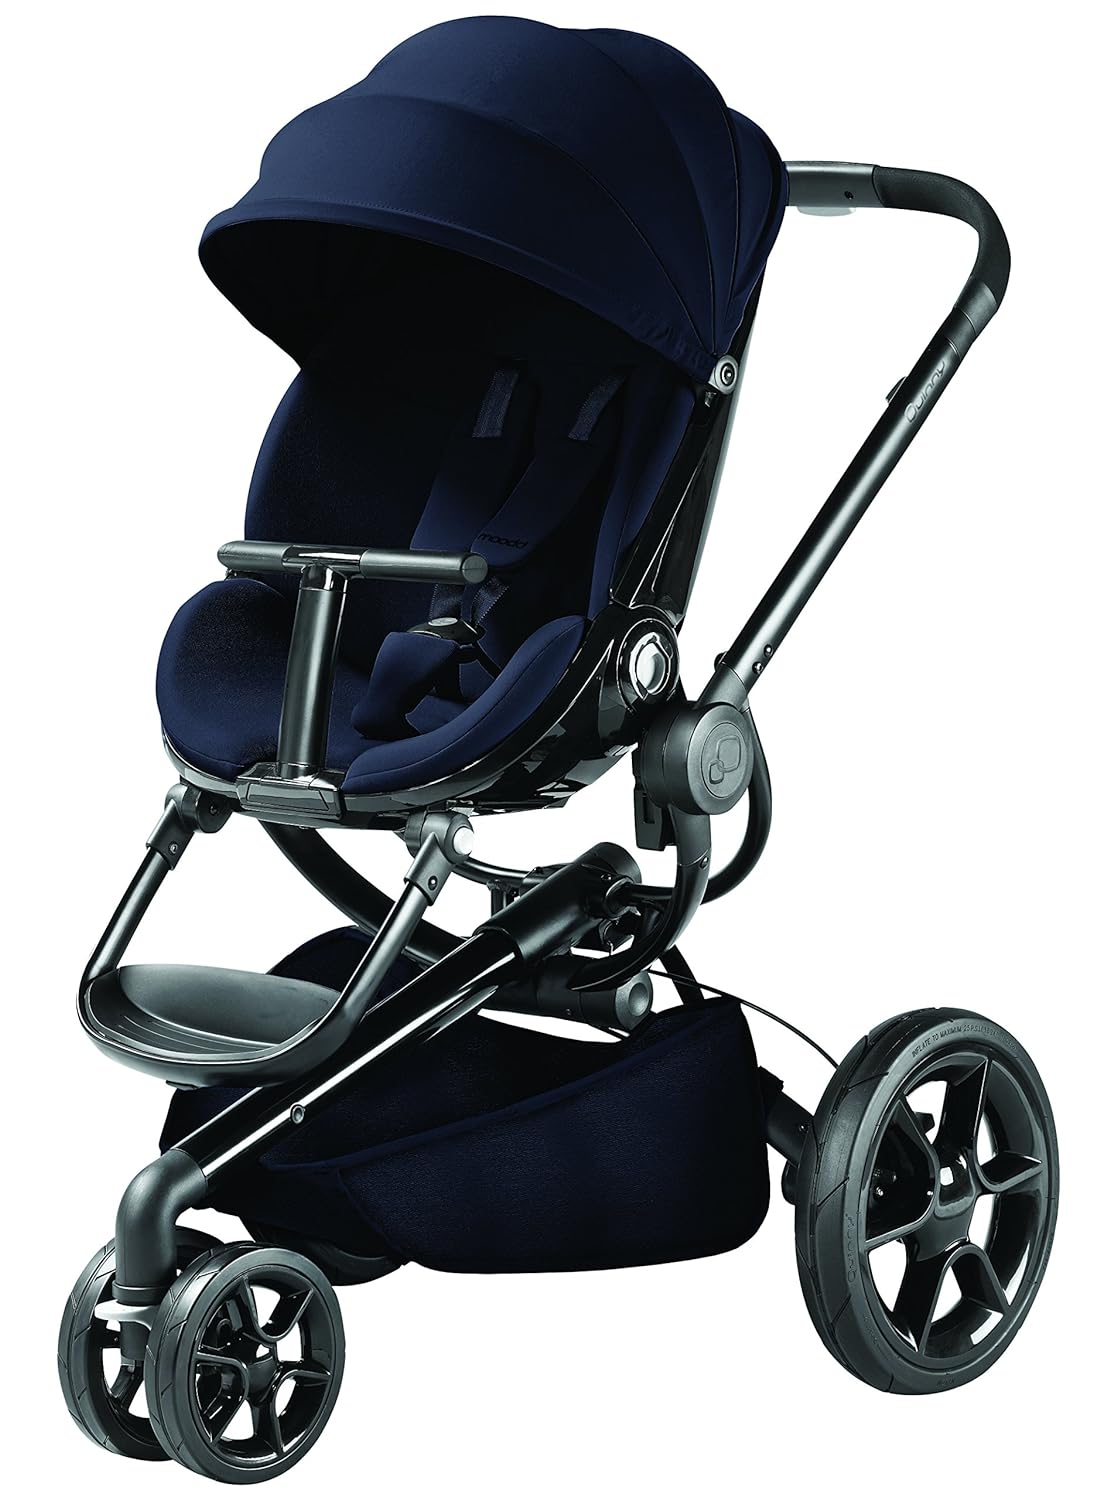 Quinny Moodd Pushchair with Automatic Pop Up Function - Reclining Position in Both Directions - Modern design from birth to approx. 3–5 years. with baby bath